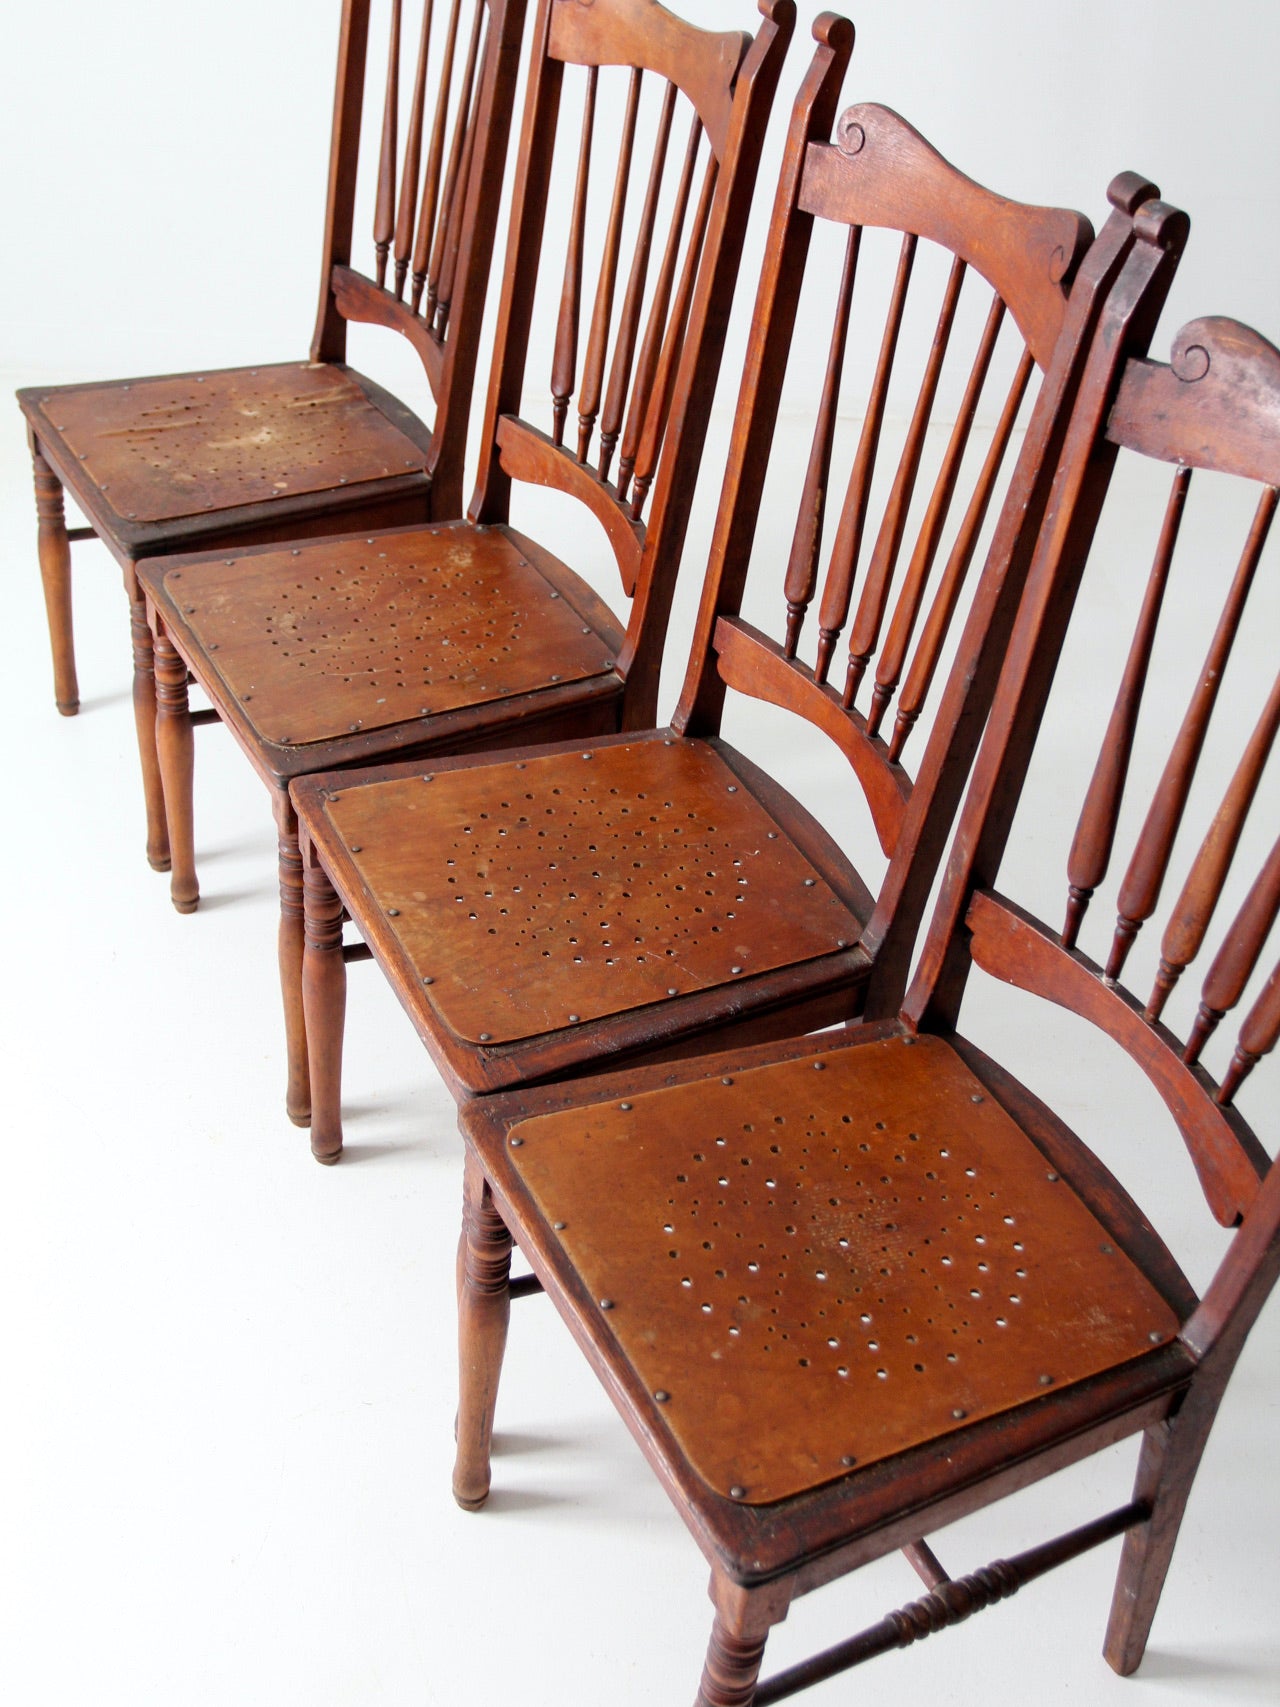 antique wooden dining chairs set/4